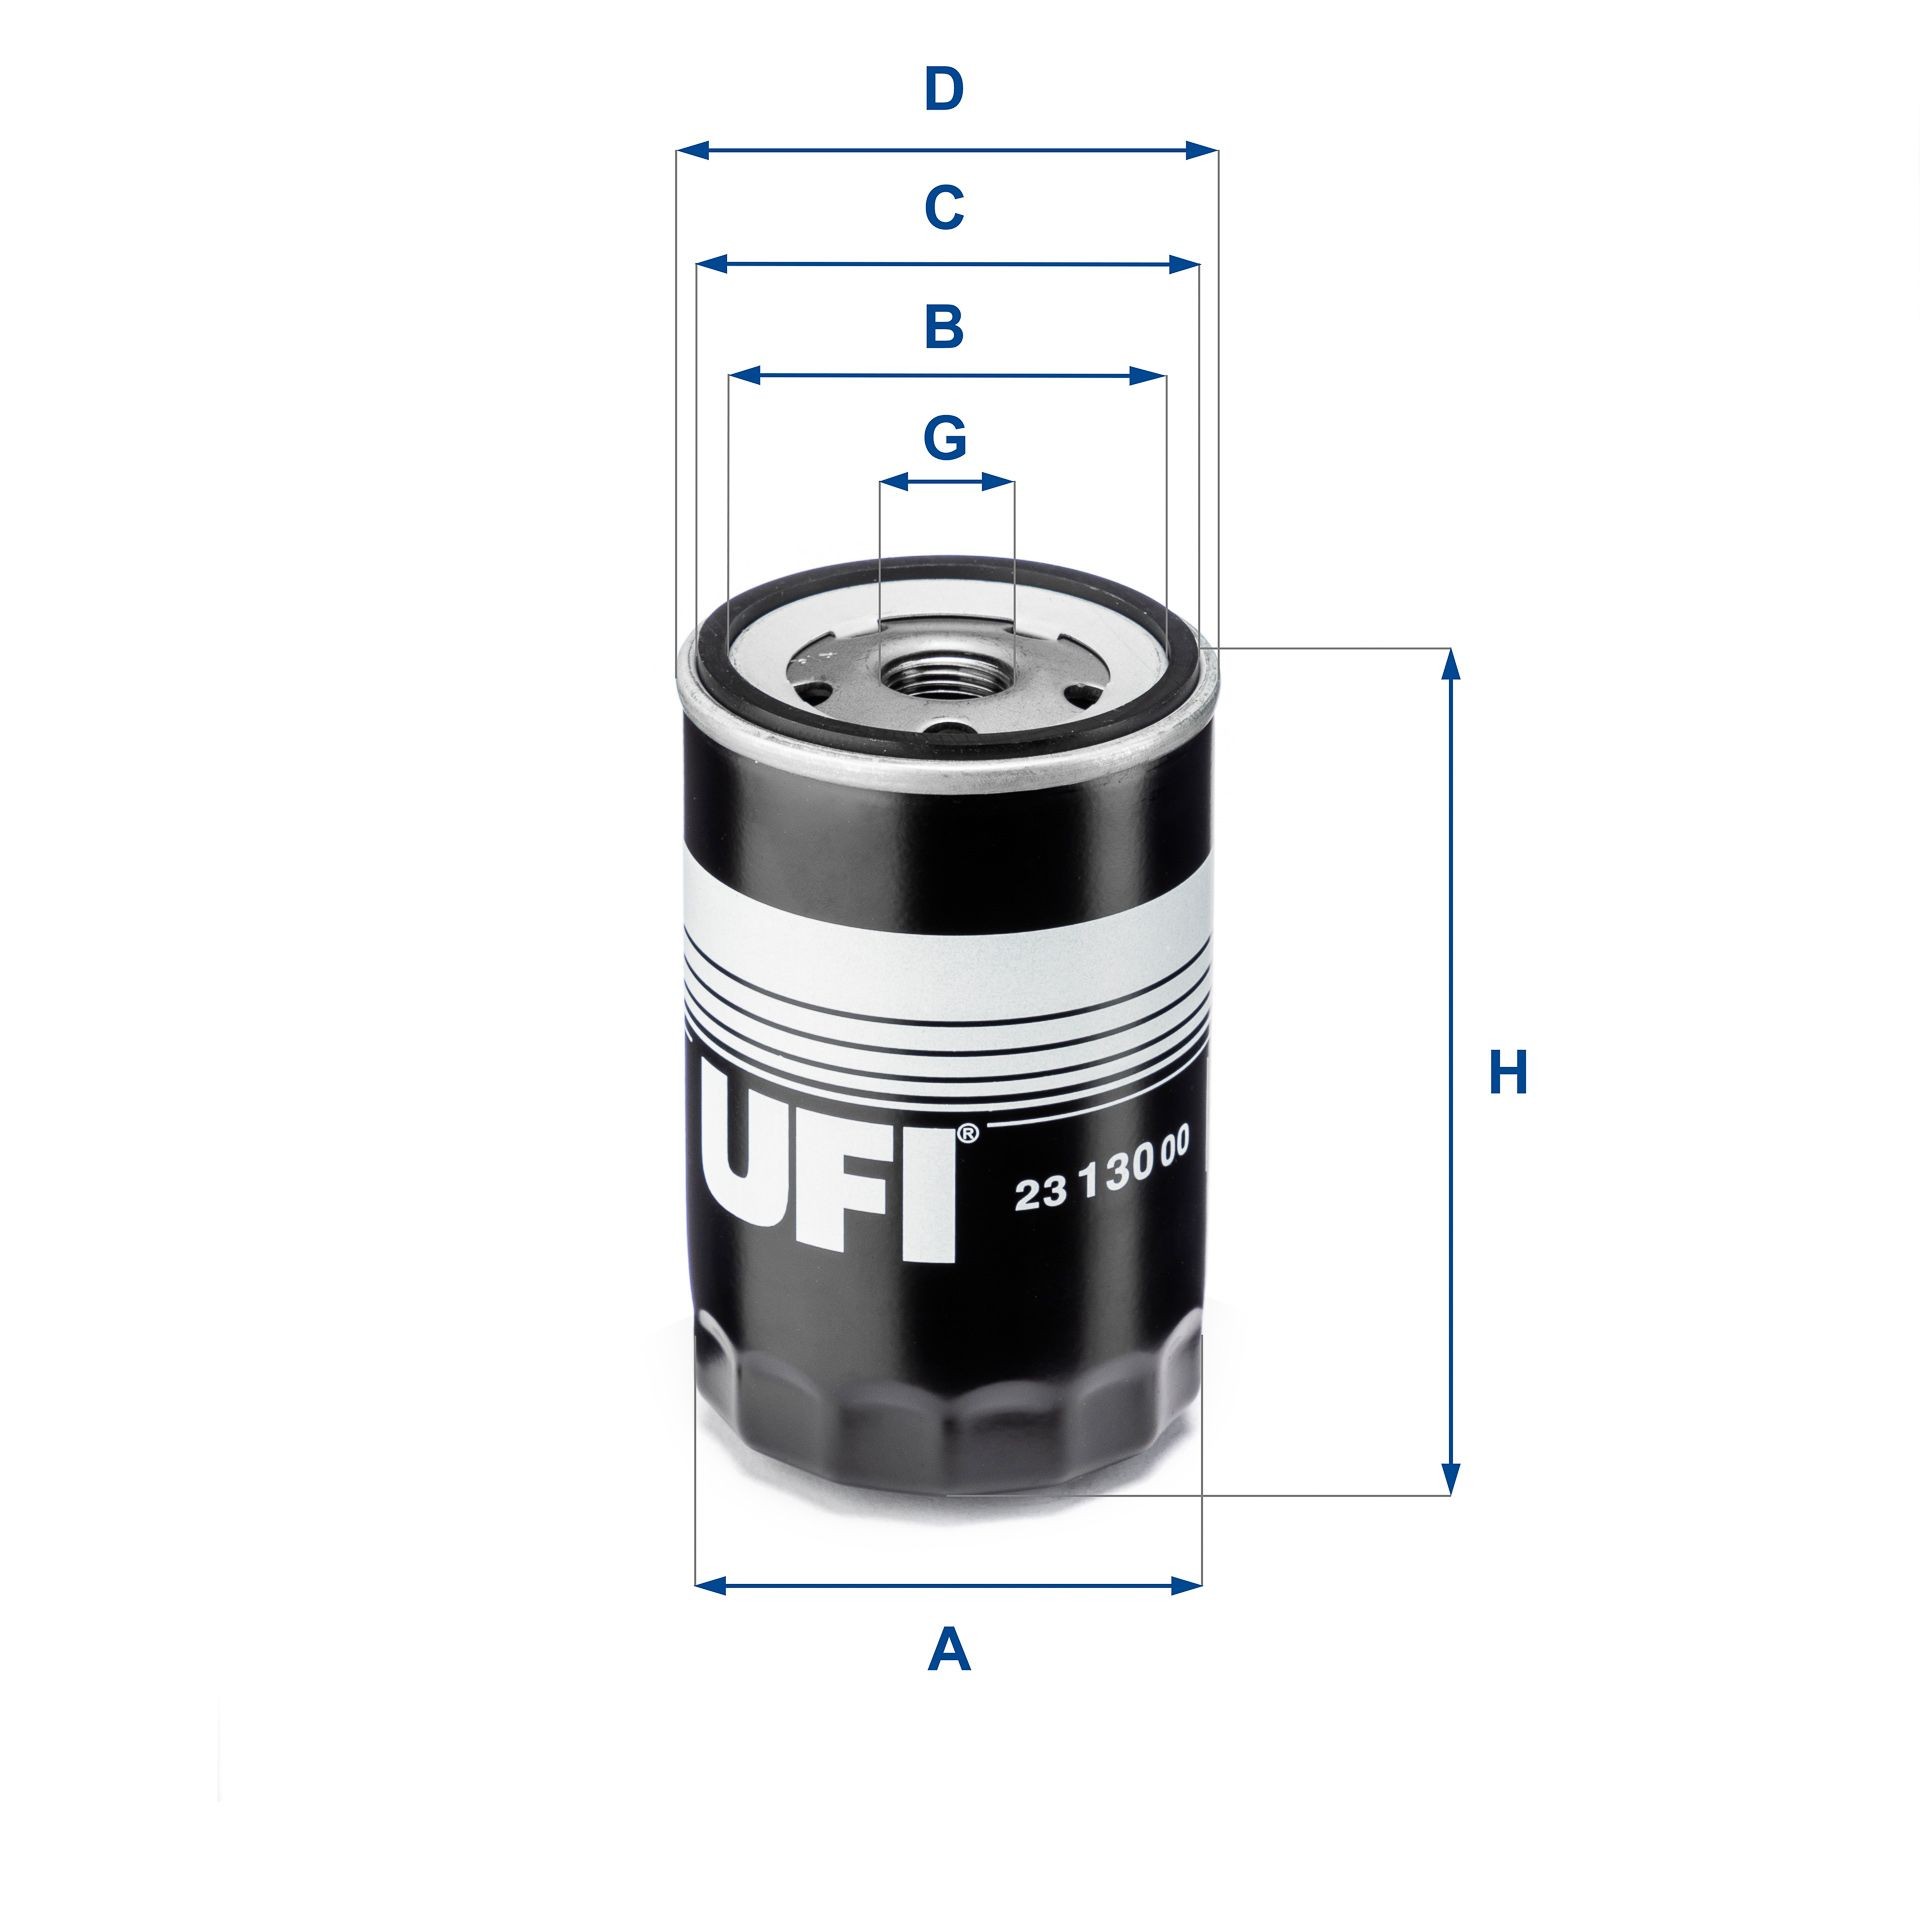 UFI 23.130.00 Oil filter 3/4-16 UNF, with one anti-return valve, Spin-on Filter